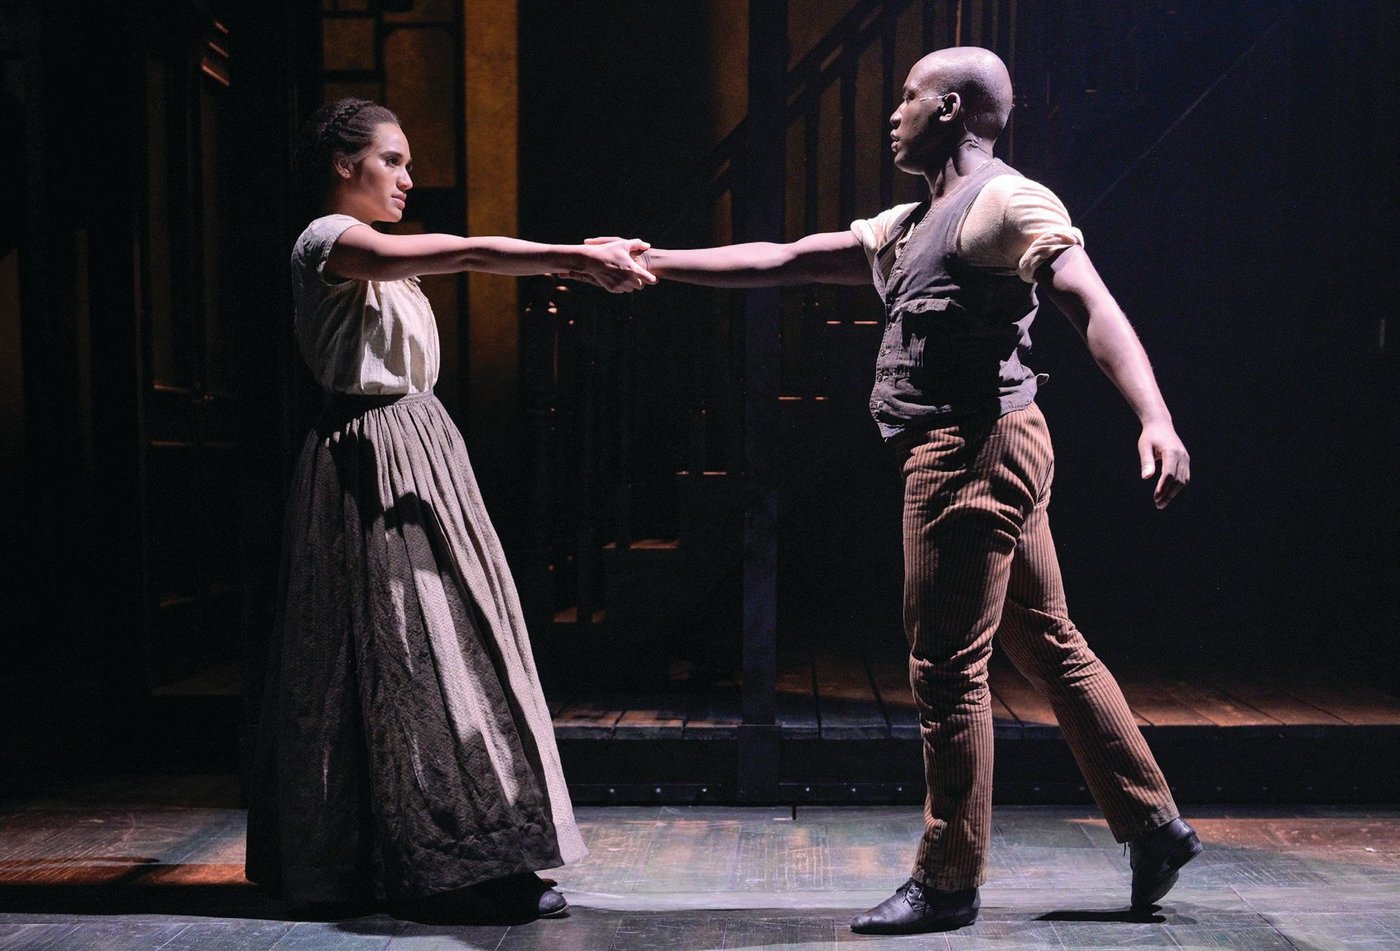 Cast members Gabrielle McClinton and Sidney DuPont share a moment on stage. PHOTO BY KEVIN BERNE